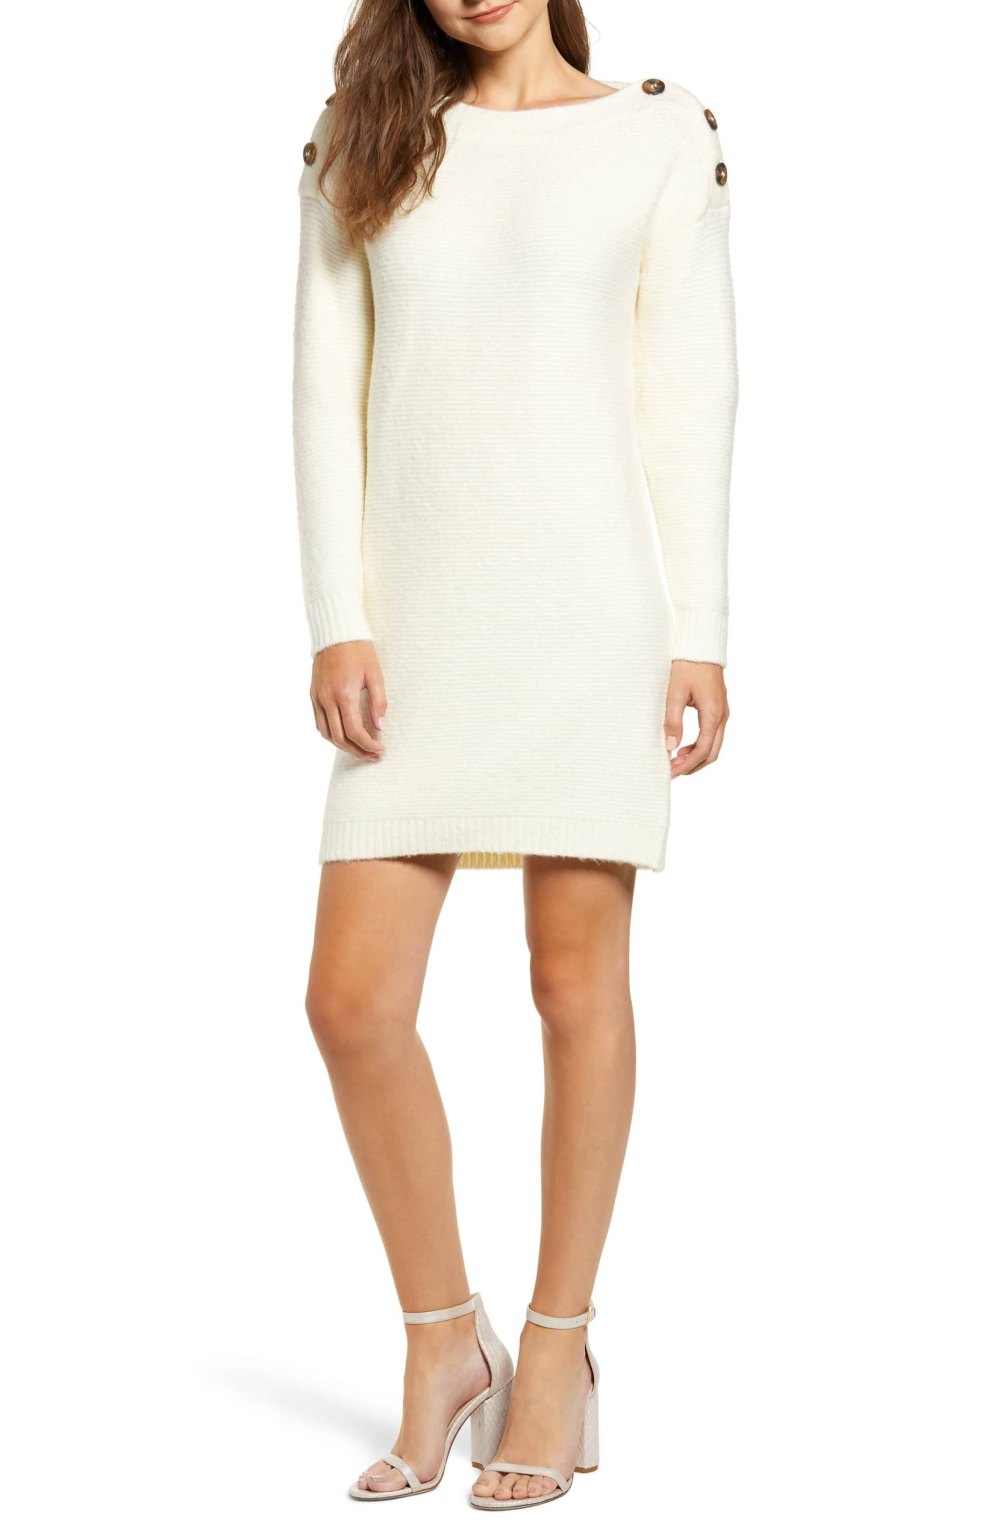 Chriselle Lim Collection Available at Nordstrom: Shop This Sweater ...